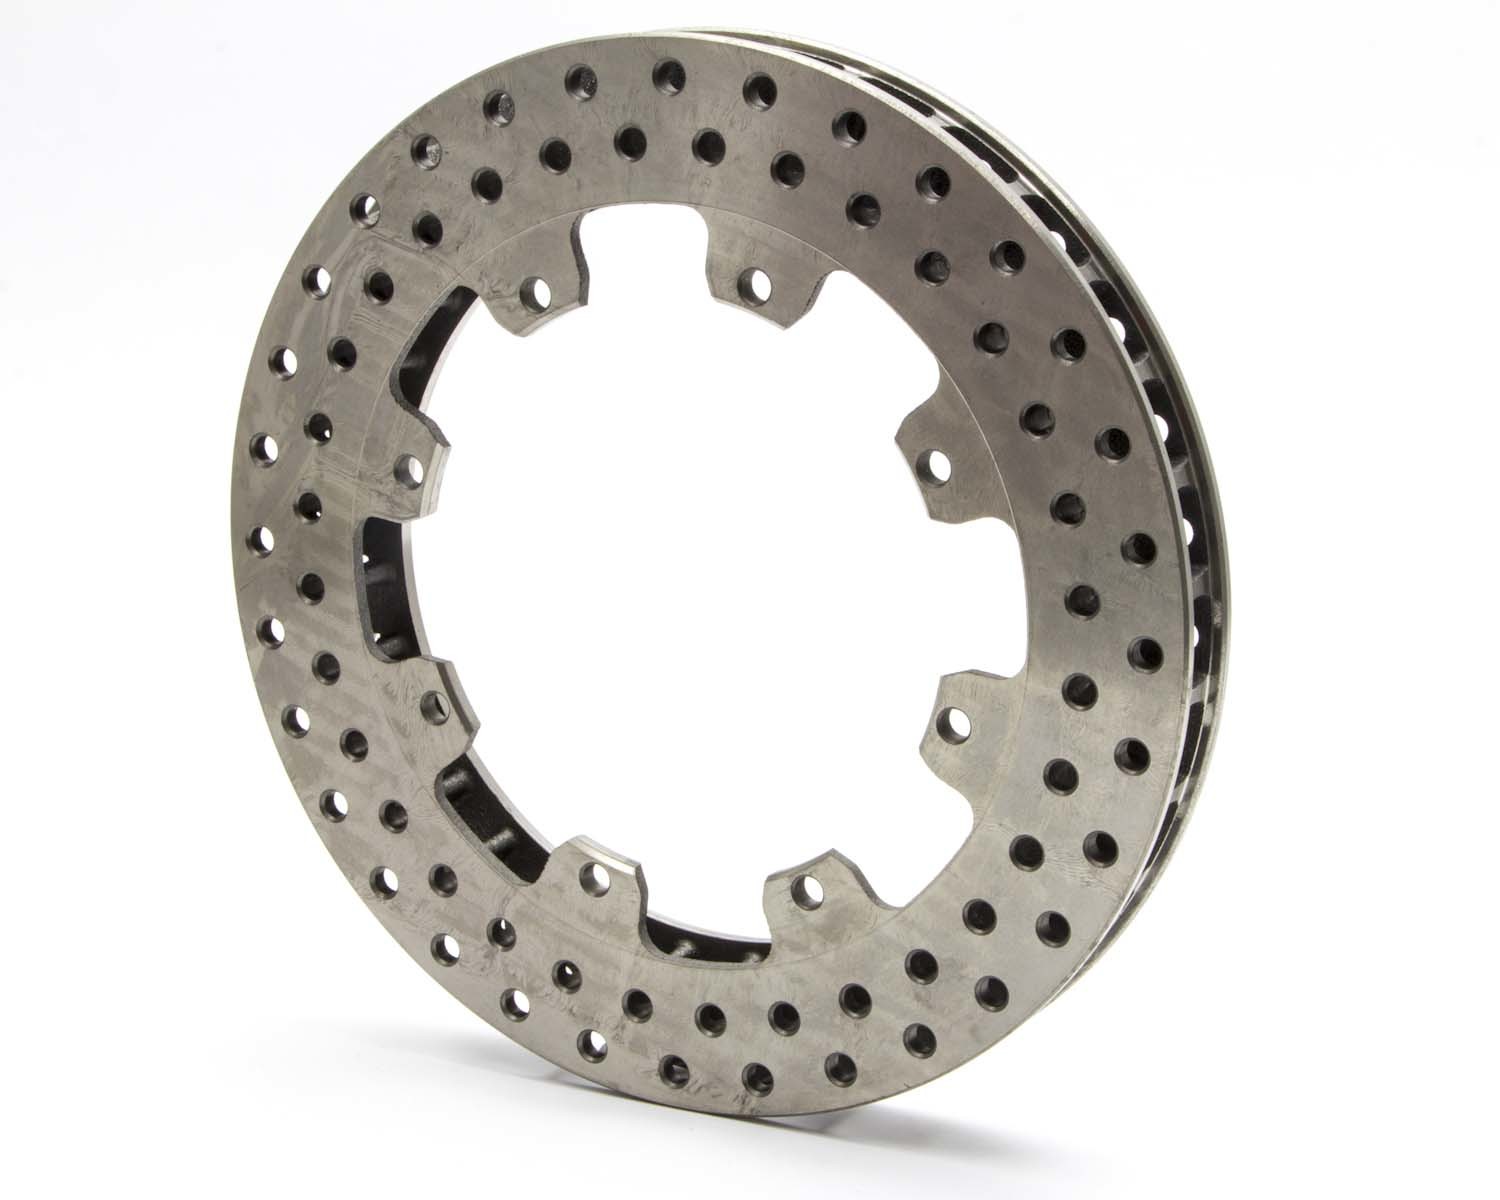 AFCO Racing Products 9850-6120 Brake Rotor, Straight Vane, Drilled, 11.750 in OD, 1.250 in Thick, 8 x 7.000 in Bolt Pattern, Steel, Natural, Each